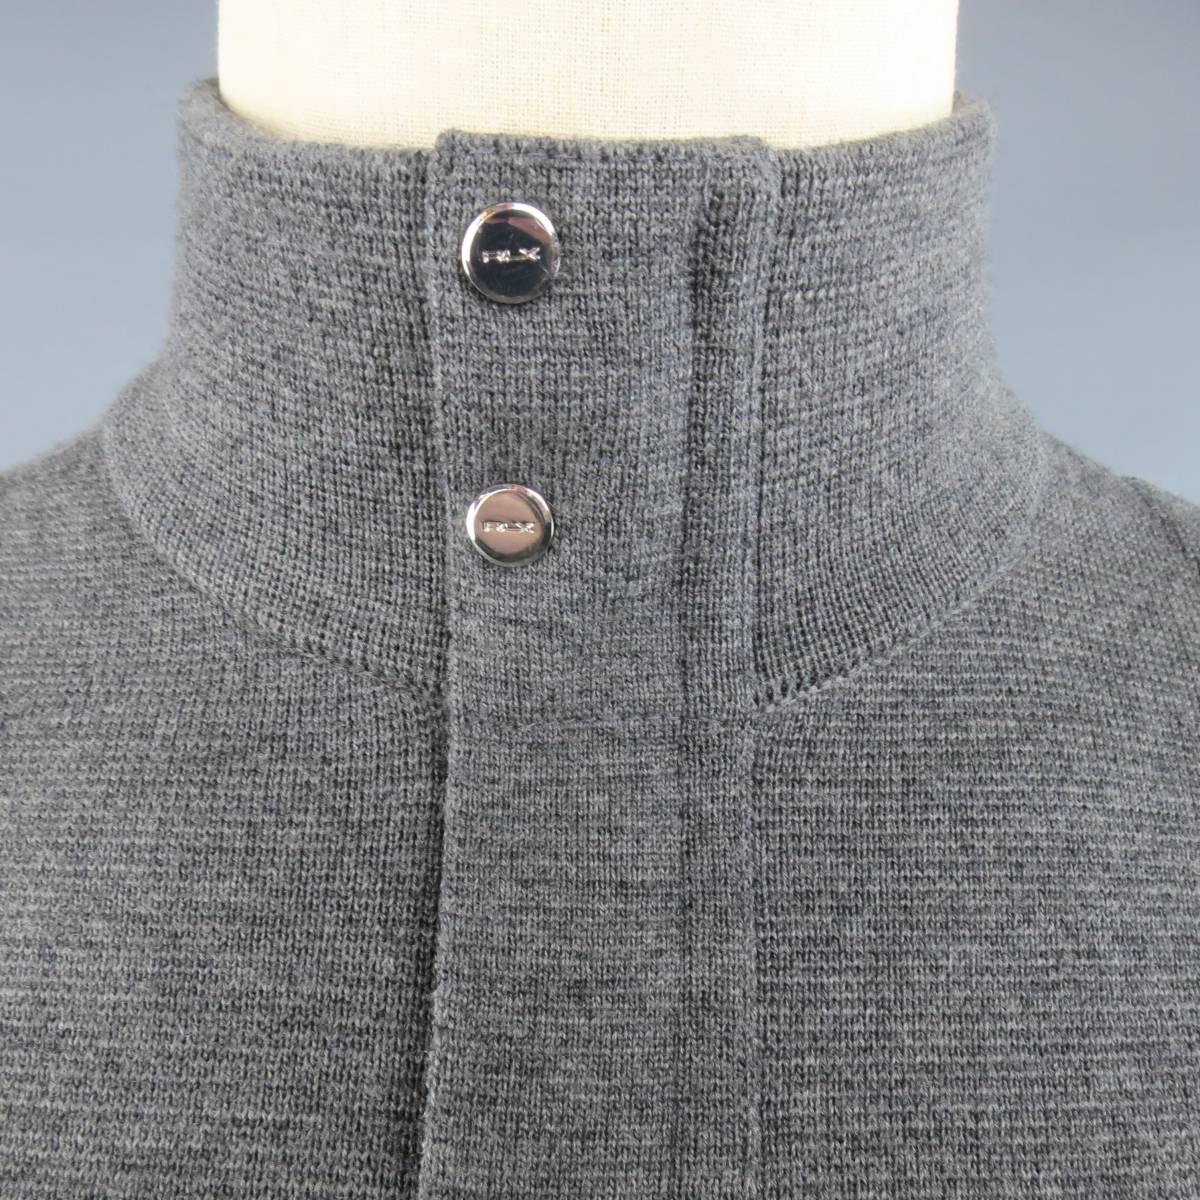 RLX RALPH LAUREN jacket in a gray merino wool knit featuring a high collar, hidden placket zip closure, zip pockets with tan leather piping, and tan leather elbow panels. Wear on leather. As-Is.
 
Fair Pre-Owned Condition.
Marked: S
 
Measurements:
